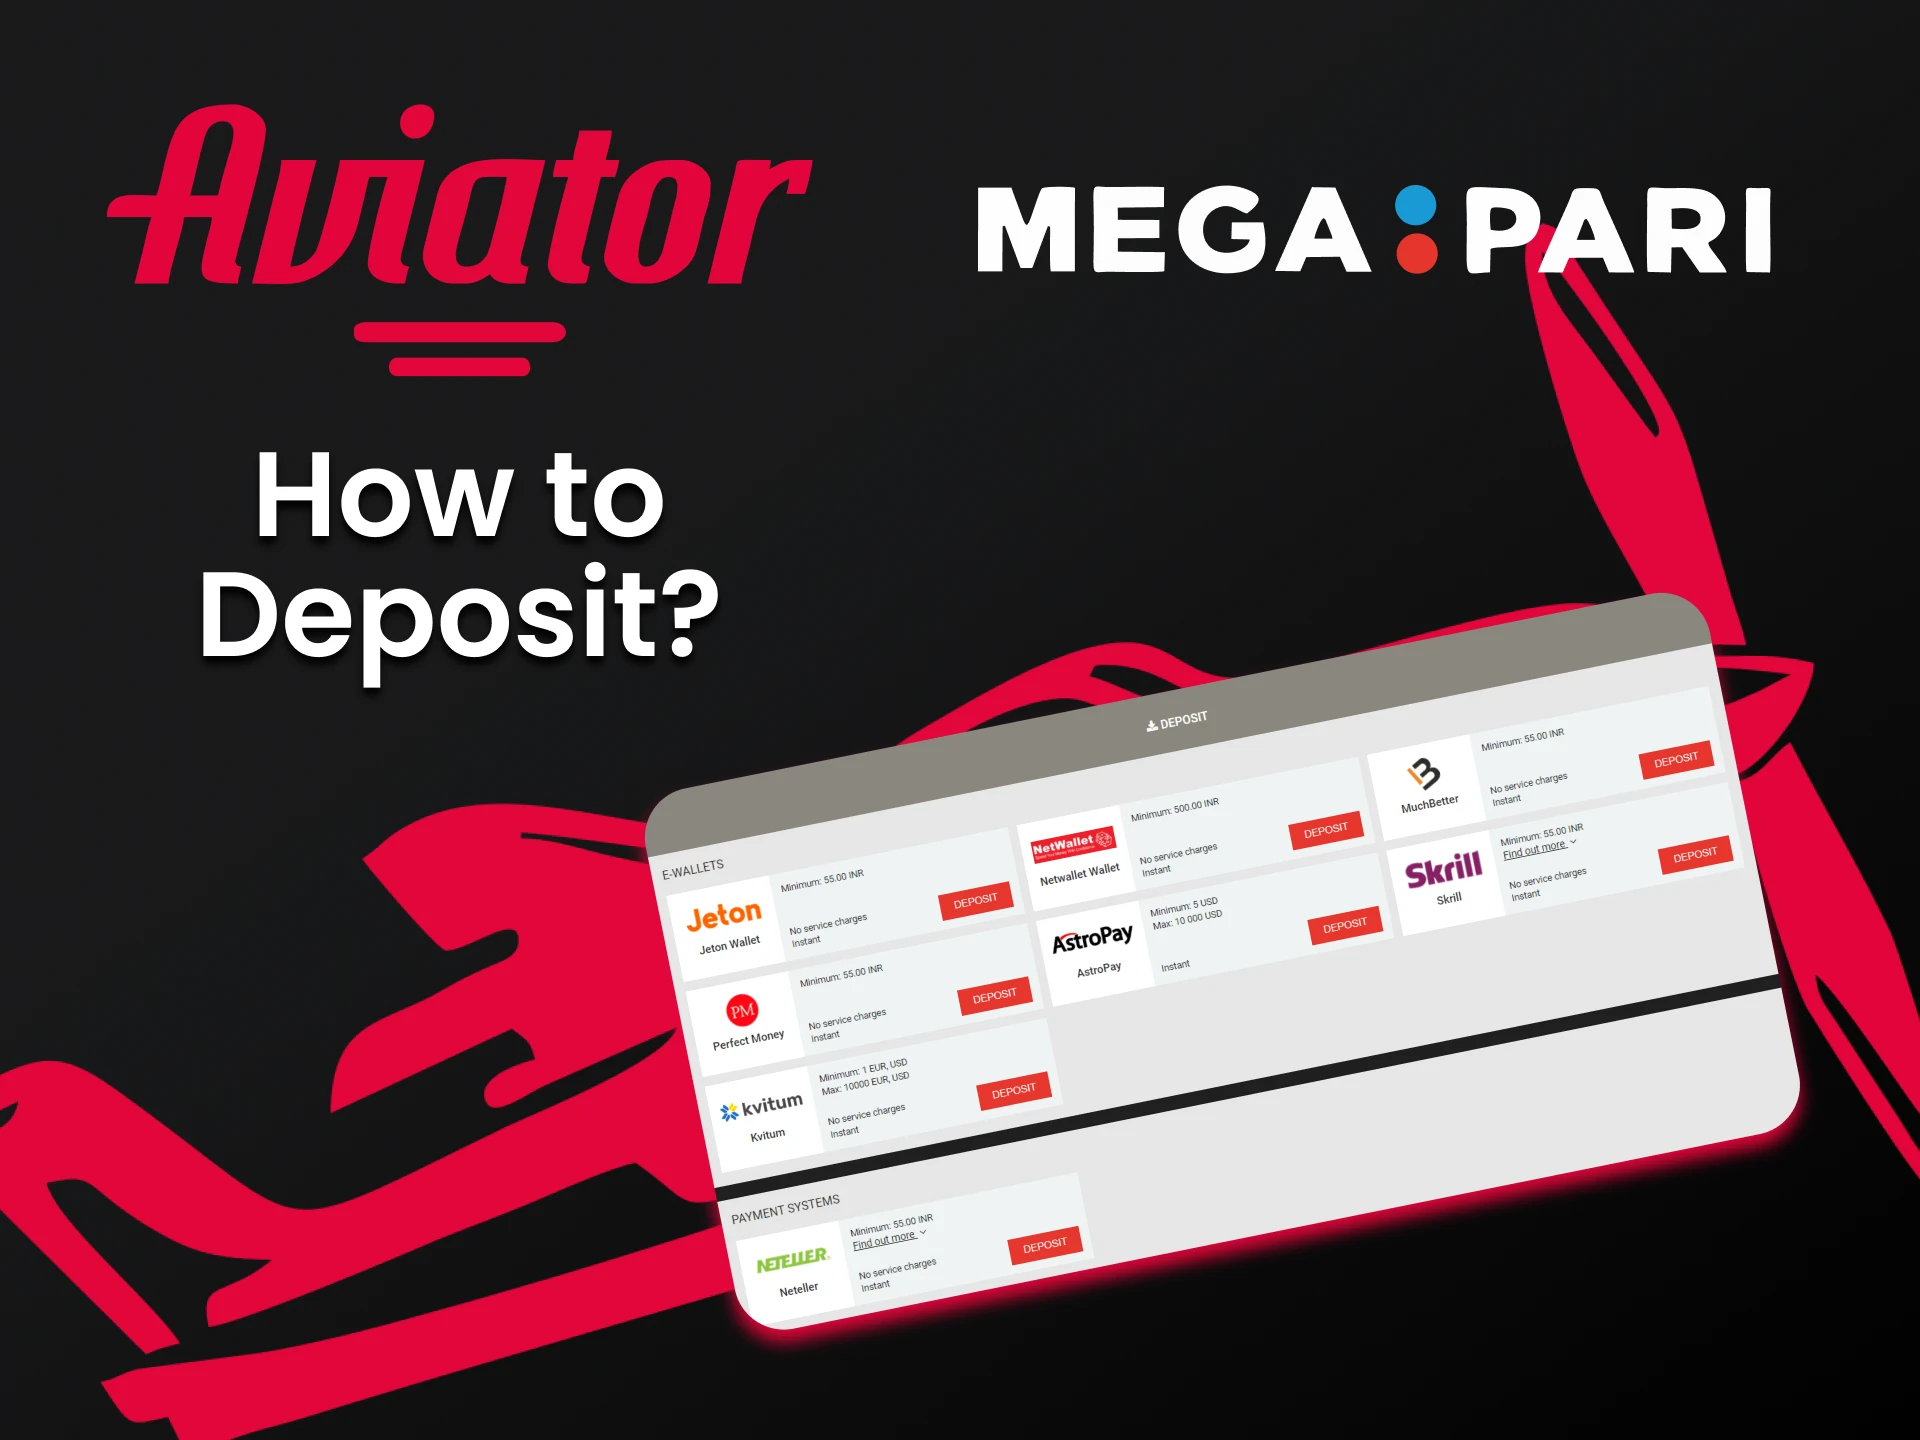 Choose a convenient way to replenish funds from Megapari.